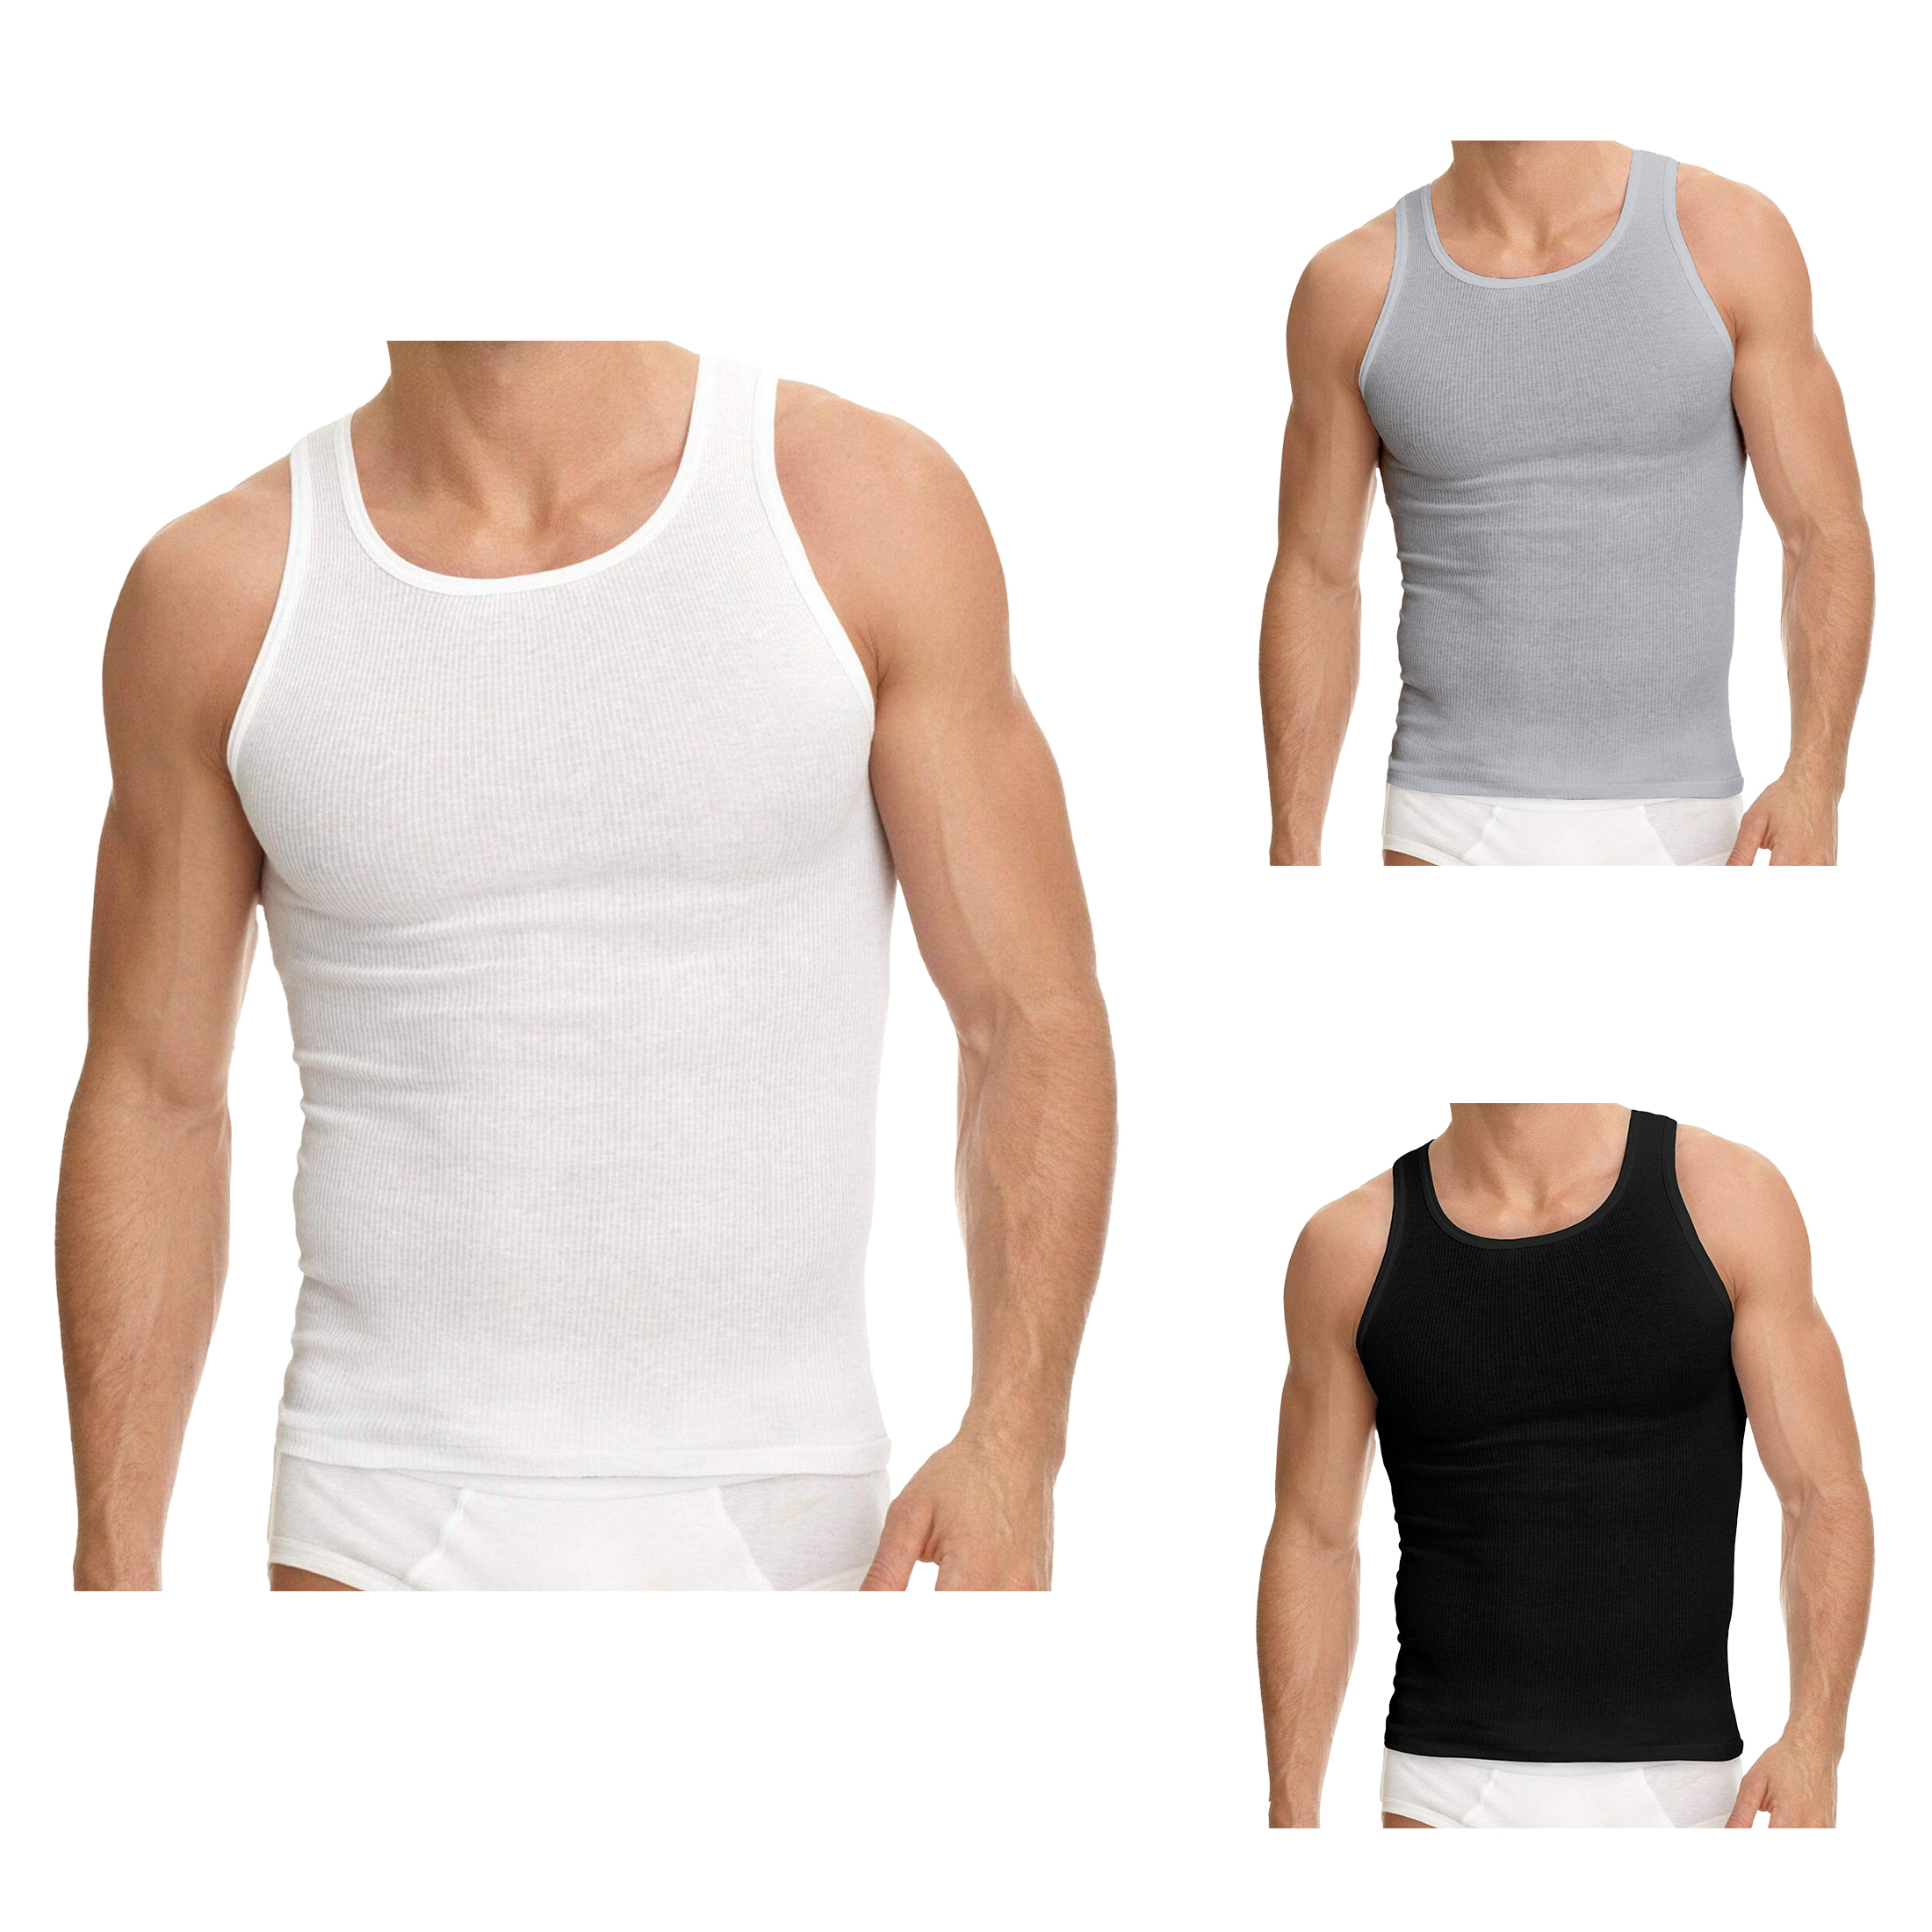 12-Pack: Men's Solid Cotton Soft Ribbed Slim-Fitting Summer Tank Tops - White, Medium